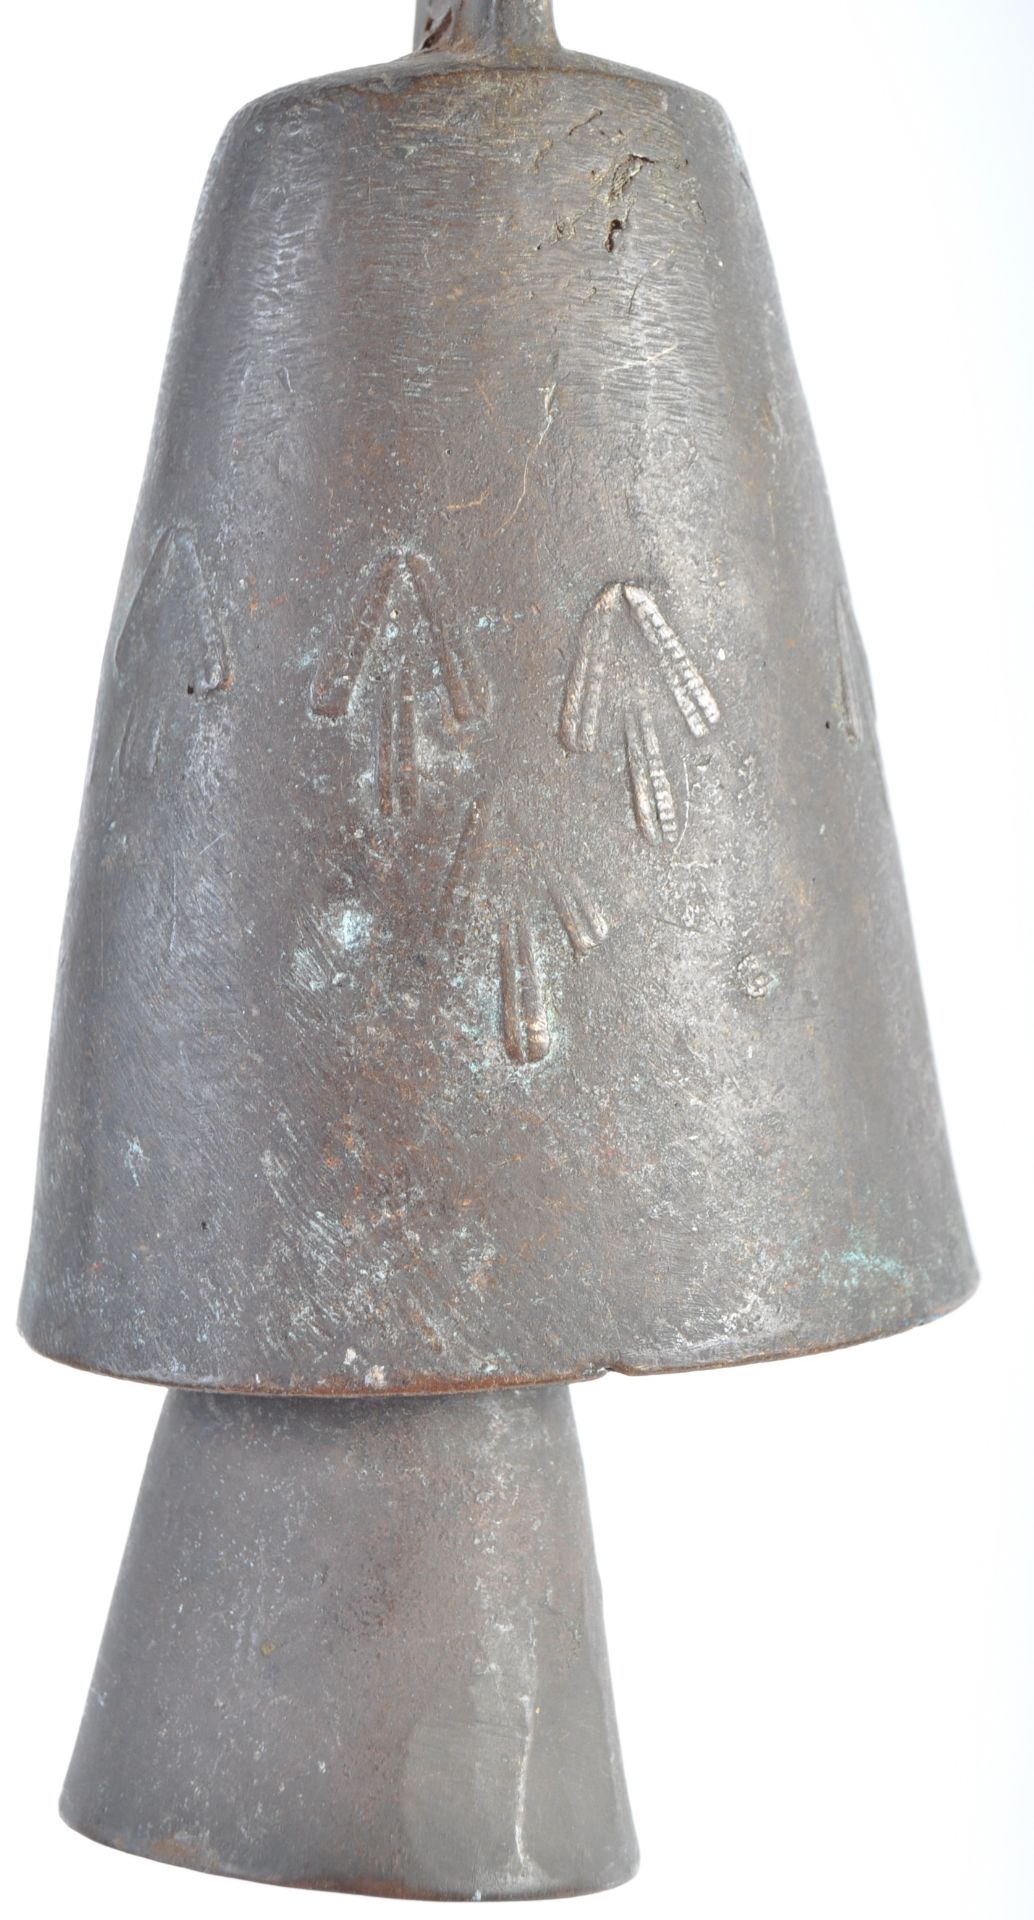 UNUSUAL WWI FIRST WORLD WAR PERIOD WAR DEPARTMENT COW BELL - Image 4 of 4